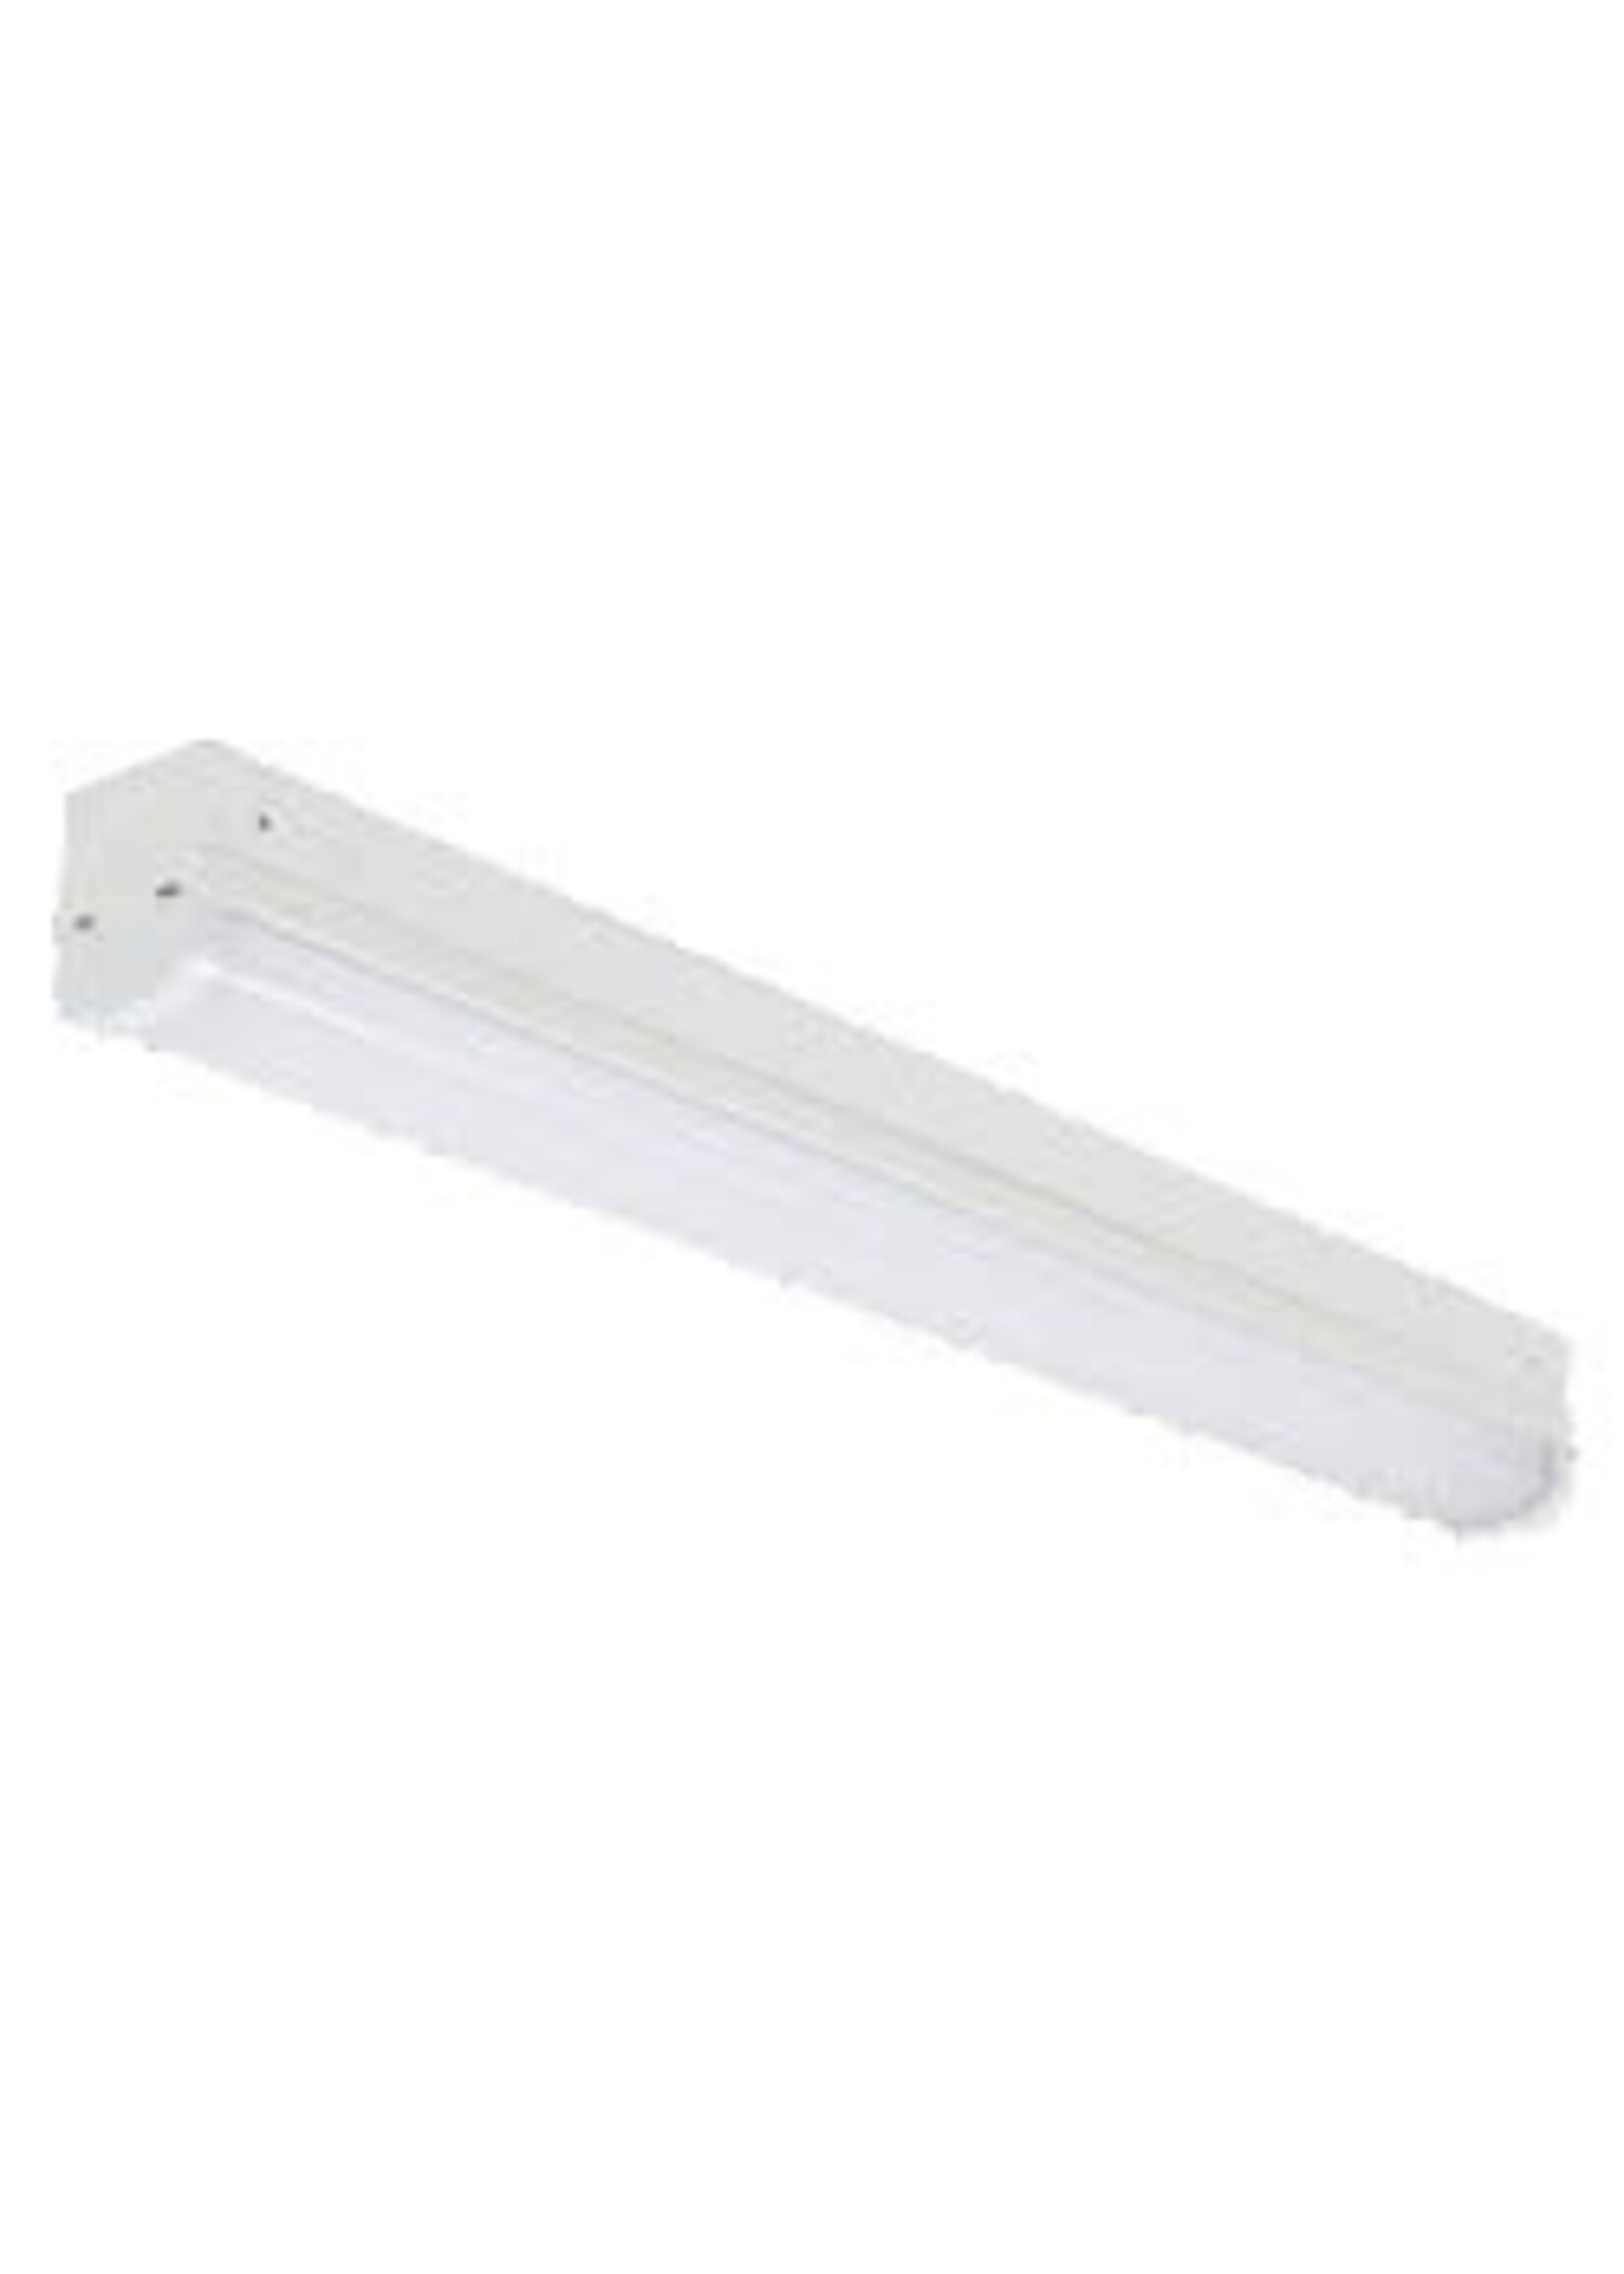 LEDVANCE 62351 DUAL SELECTABLE STRIP LED LAMP 2FT 10W, 15W AND 20W, 120-277V